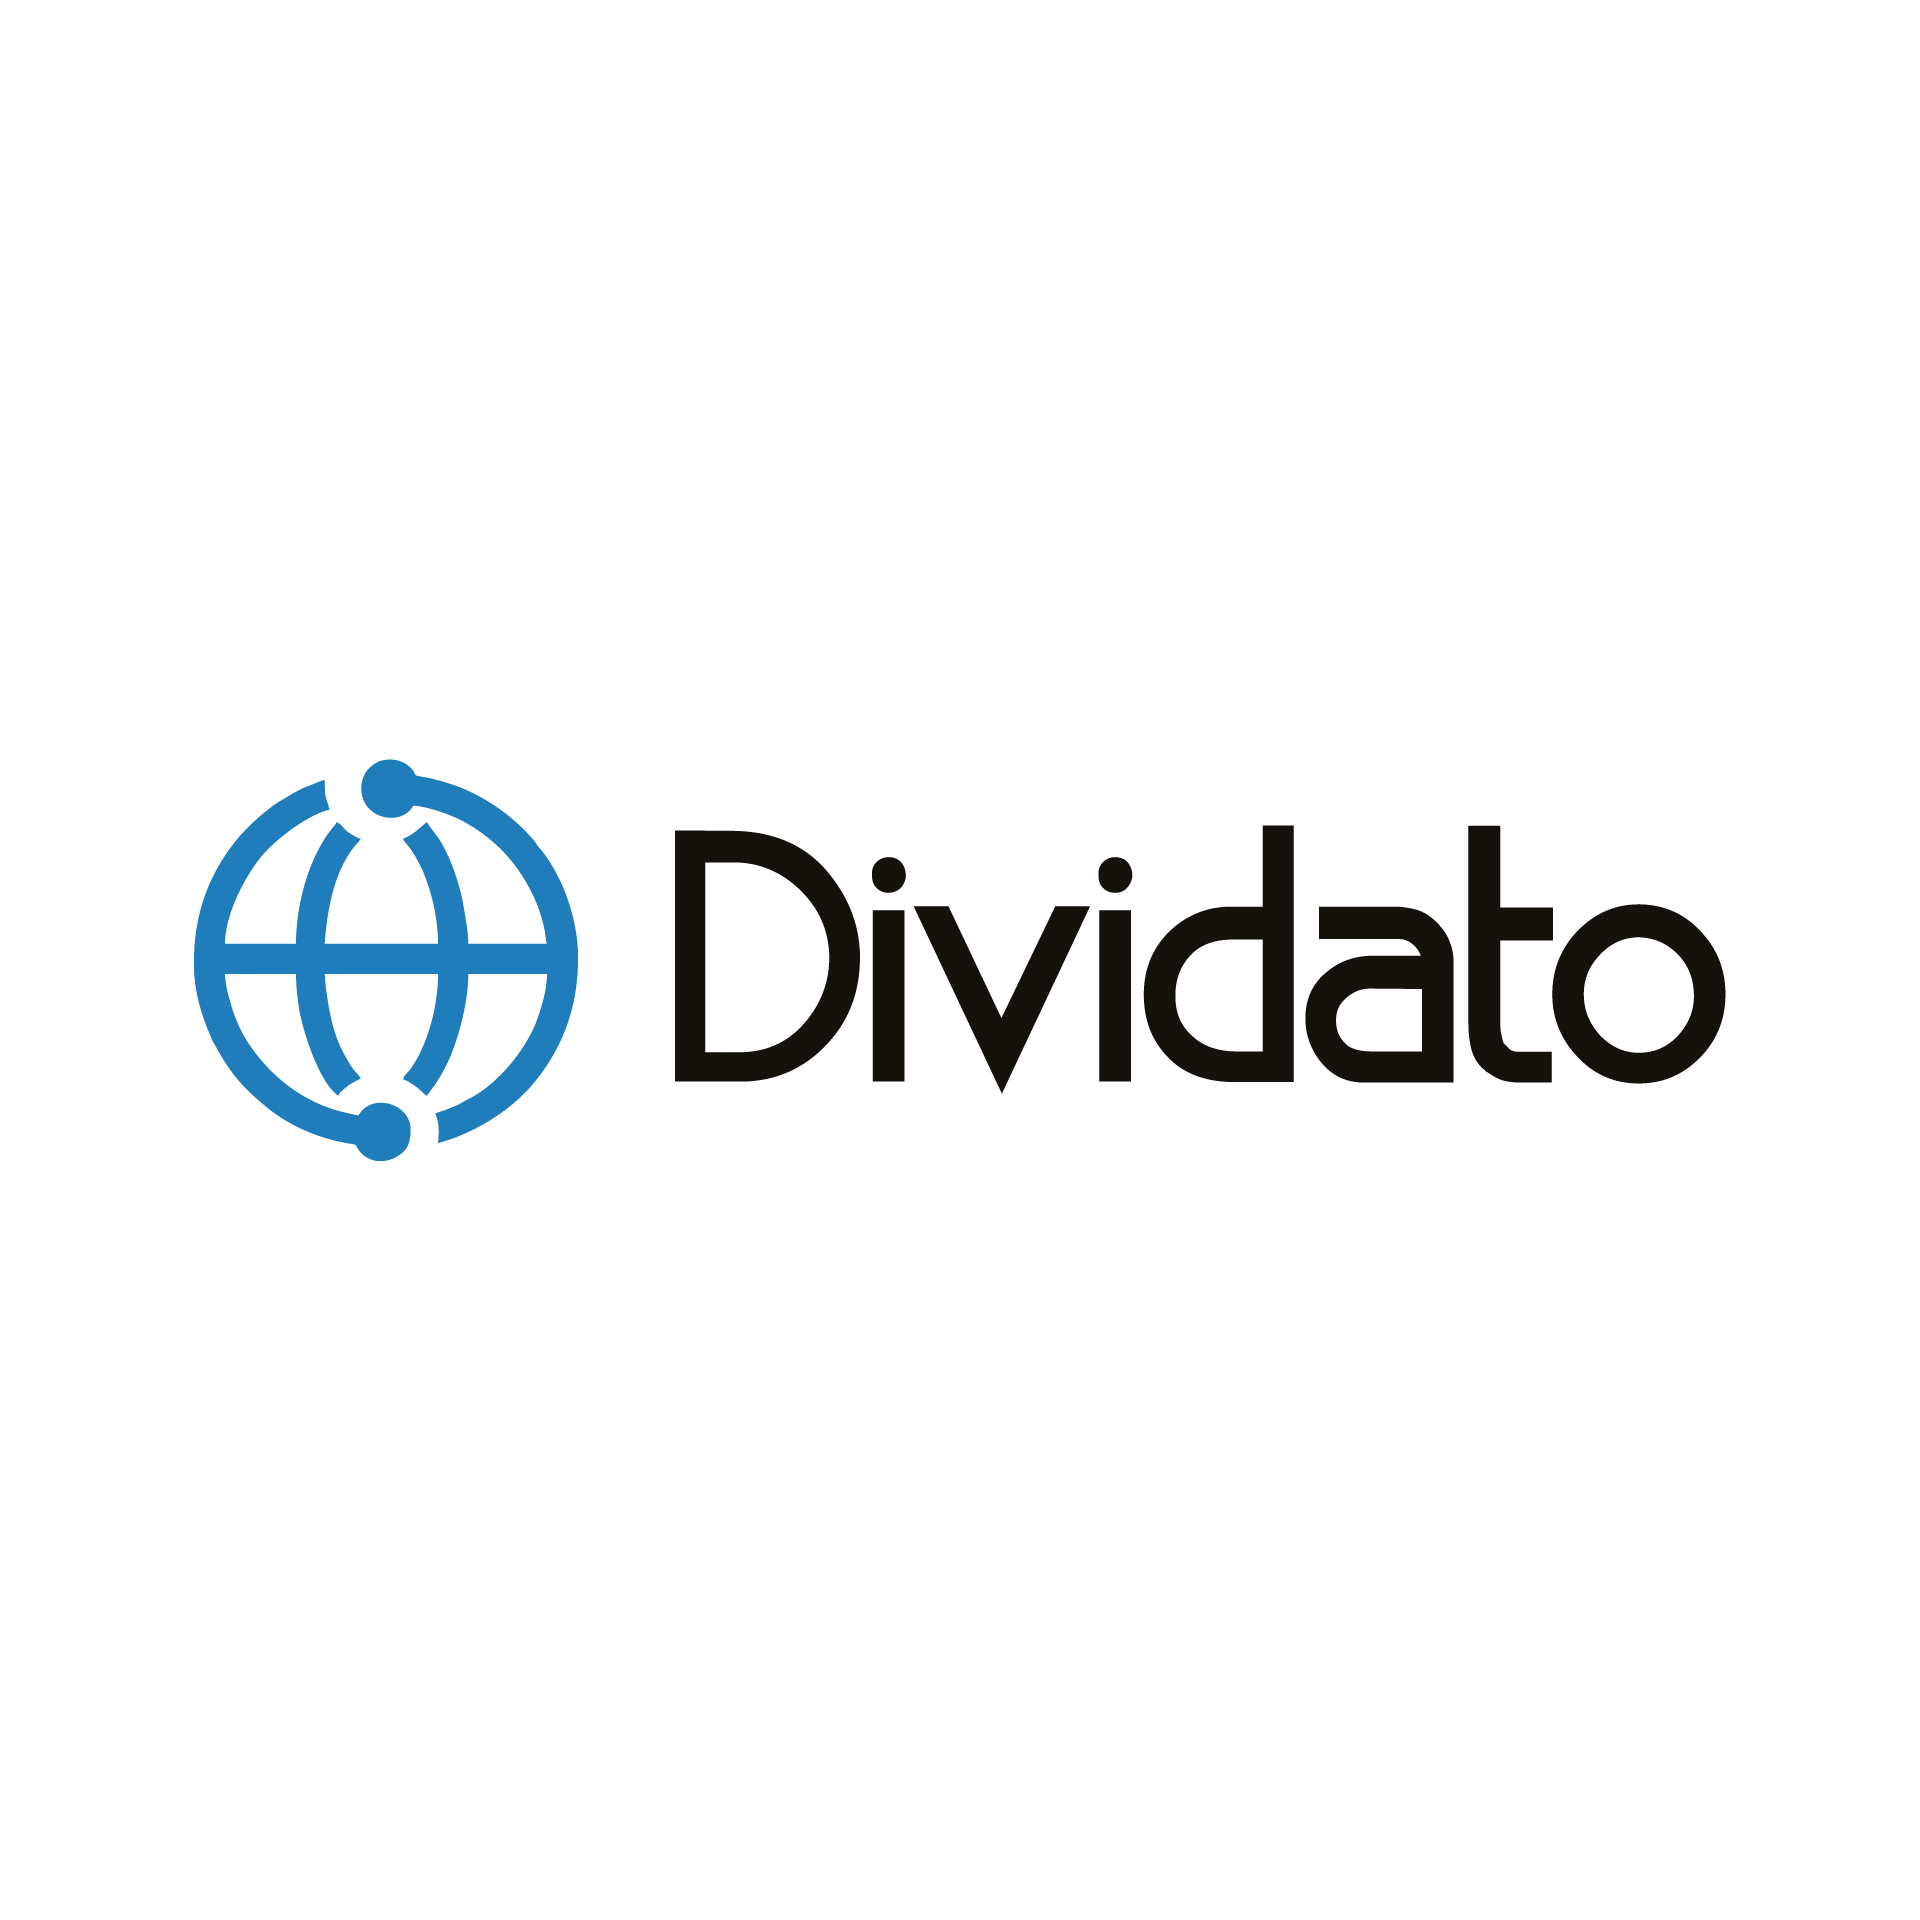 Dividato Software Development profile on Qualified.One